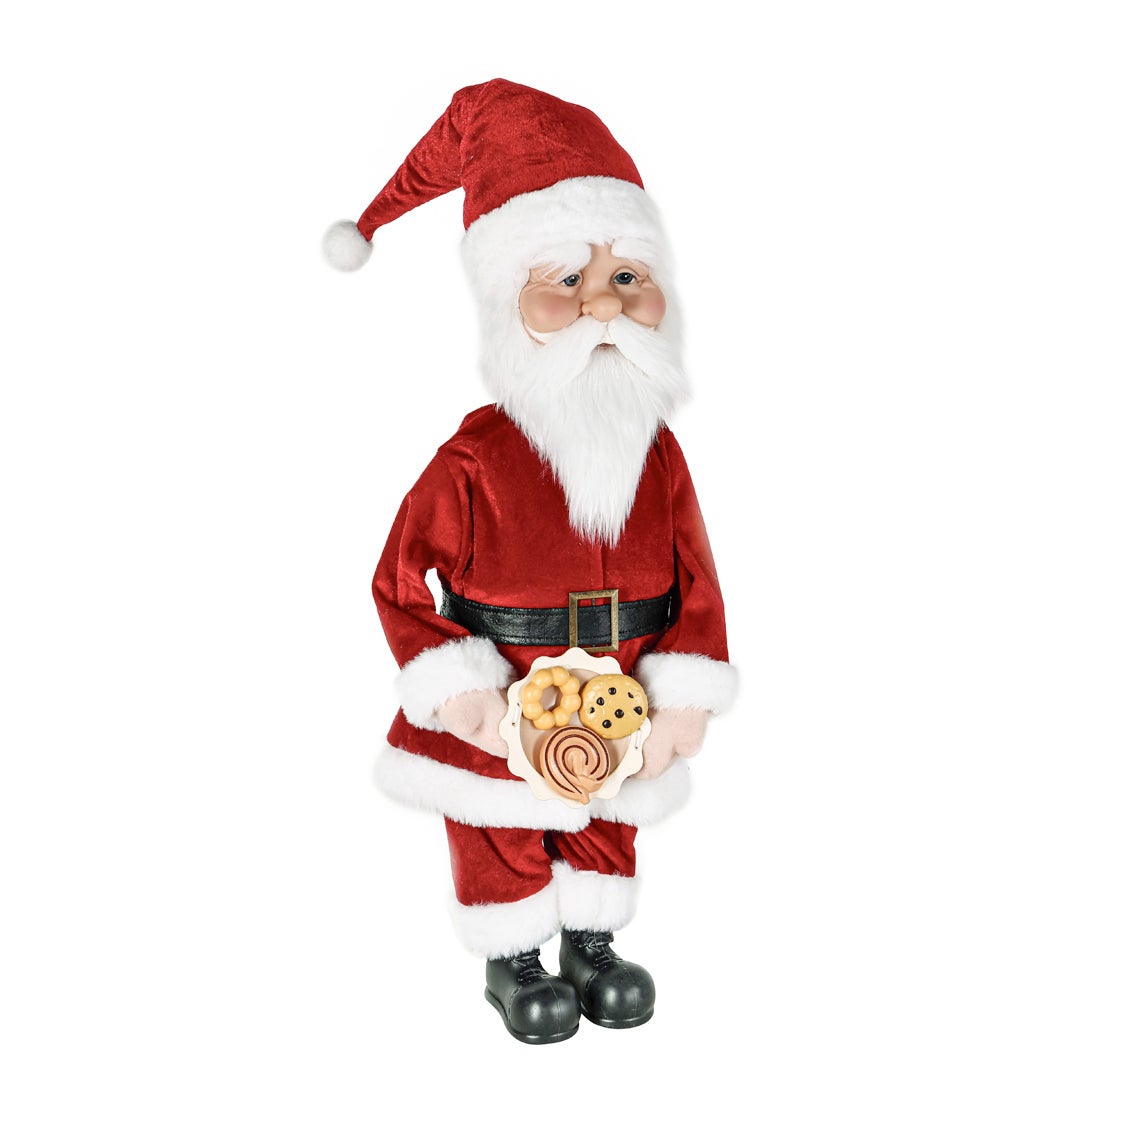 33" Fabric Santa Claus with Plate of Cookies